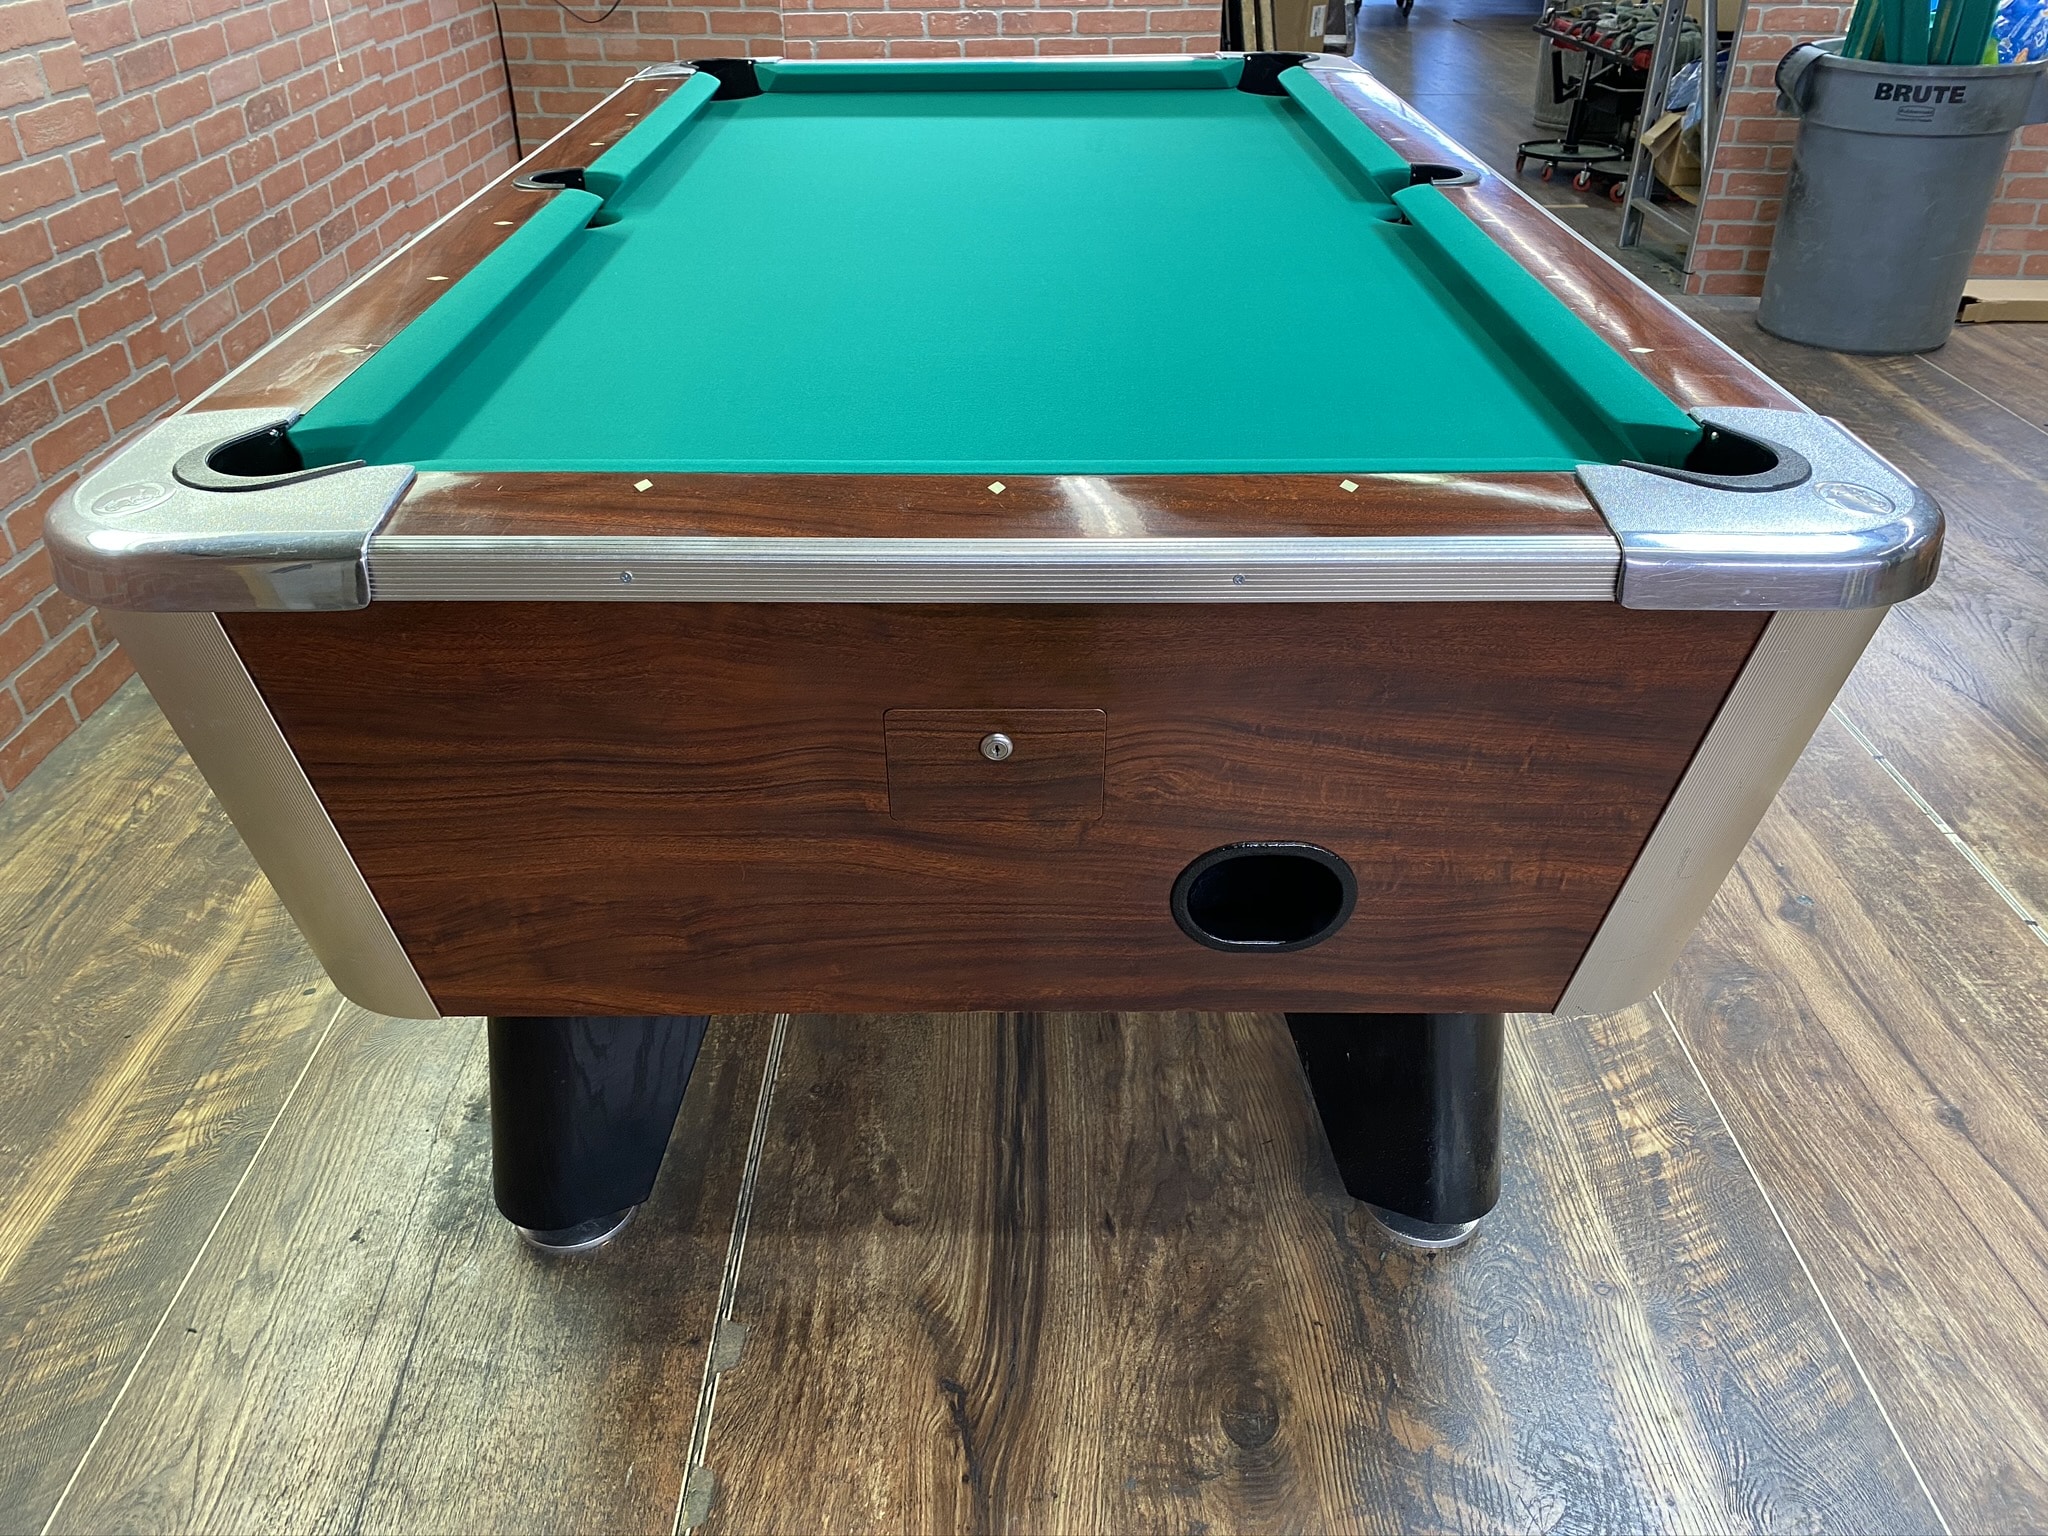 6 1/2 Valley Used Coin Operated Pool Table Used Coin Operated Bar